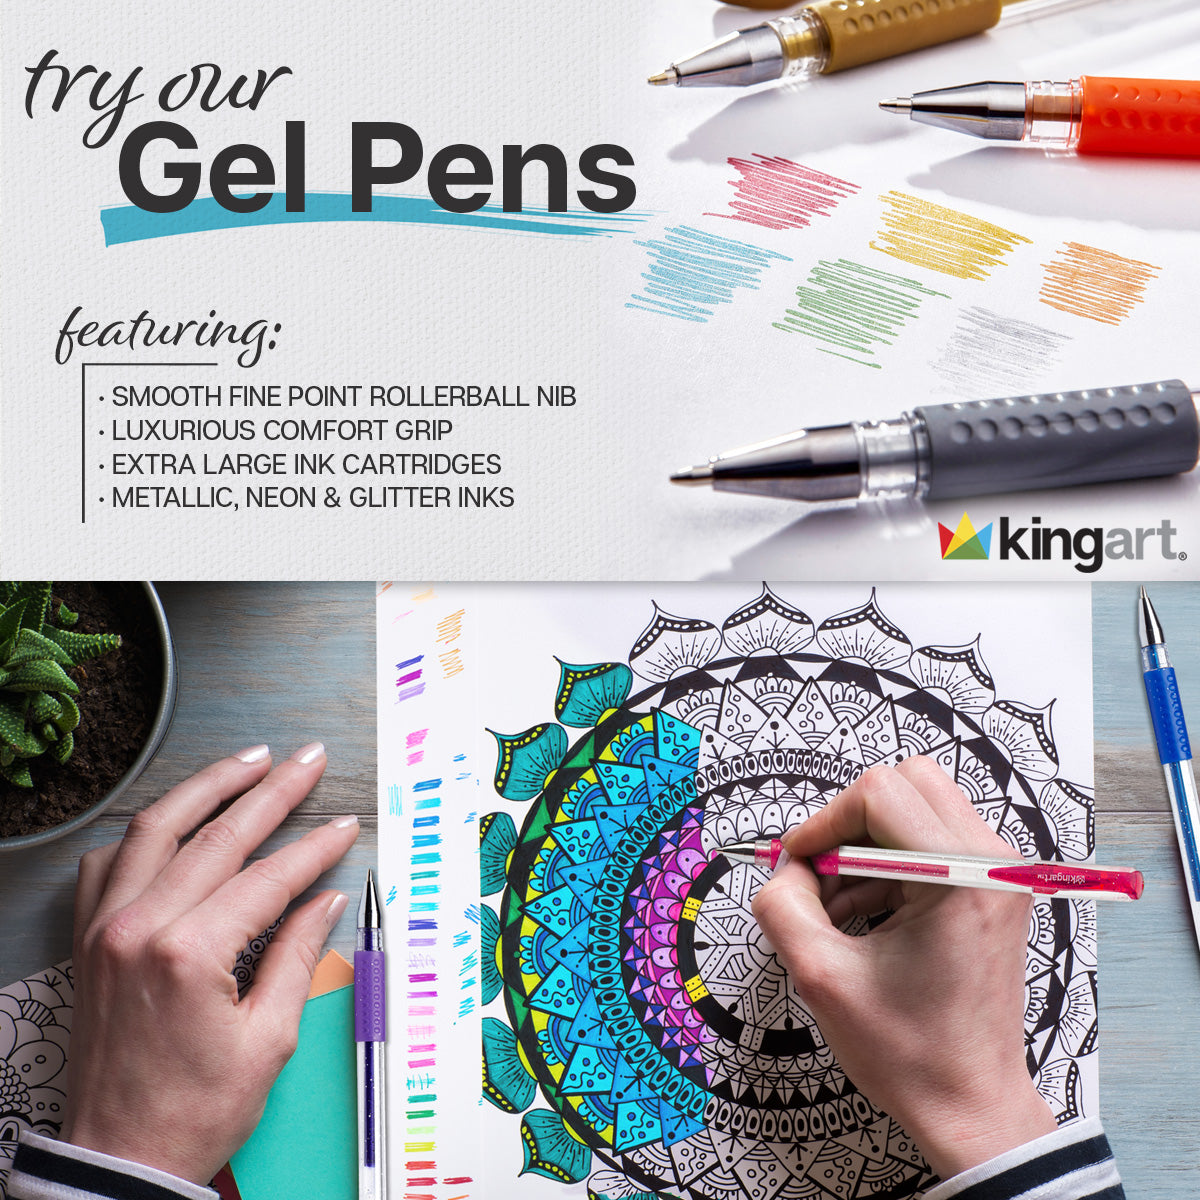 The Best Gel Pens for Art: Unleash Your Creativity with the Right